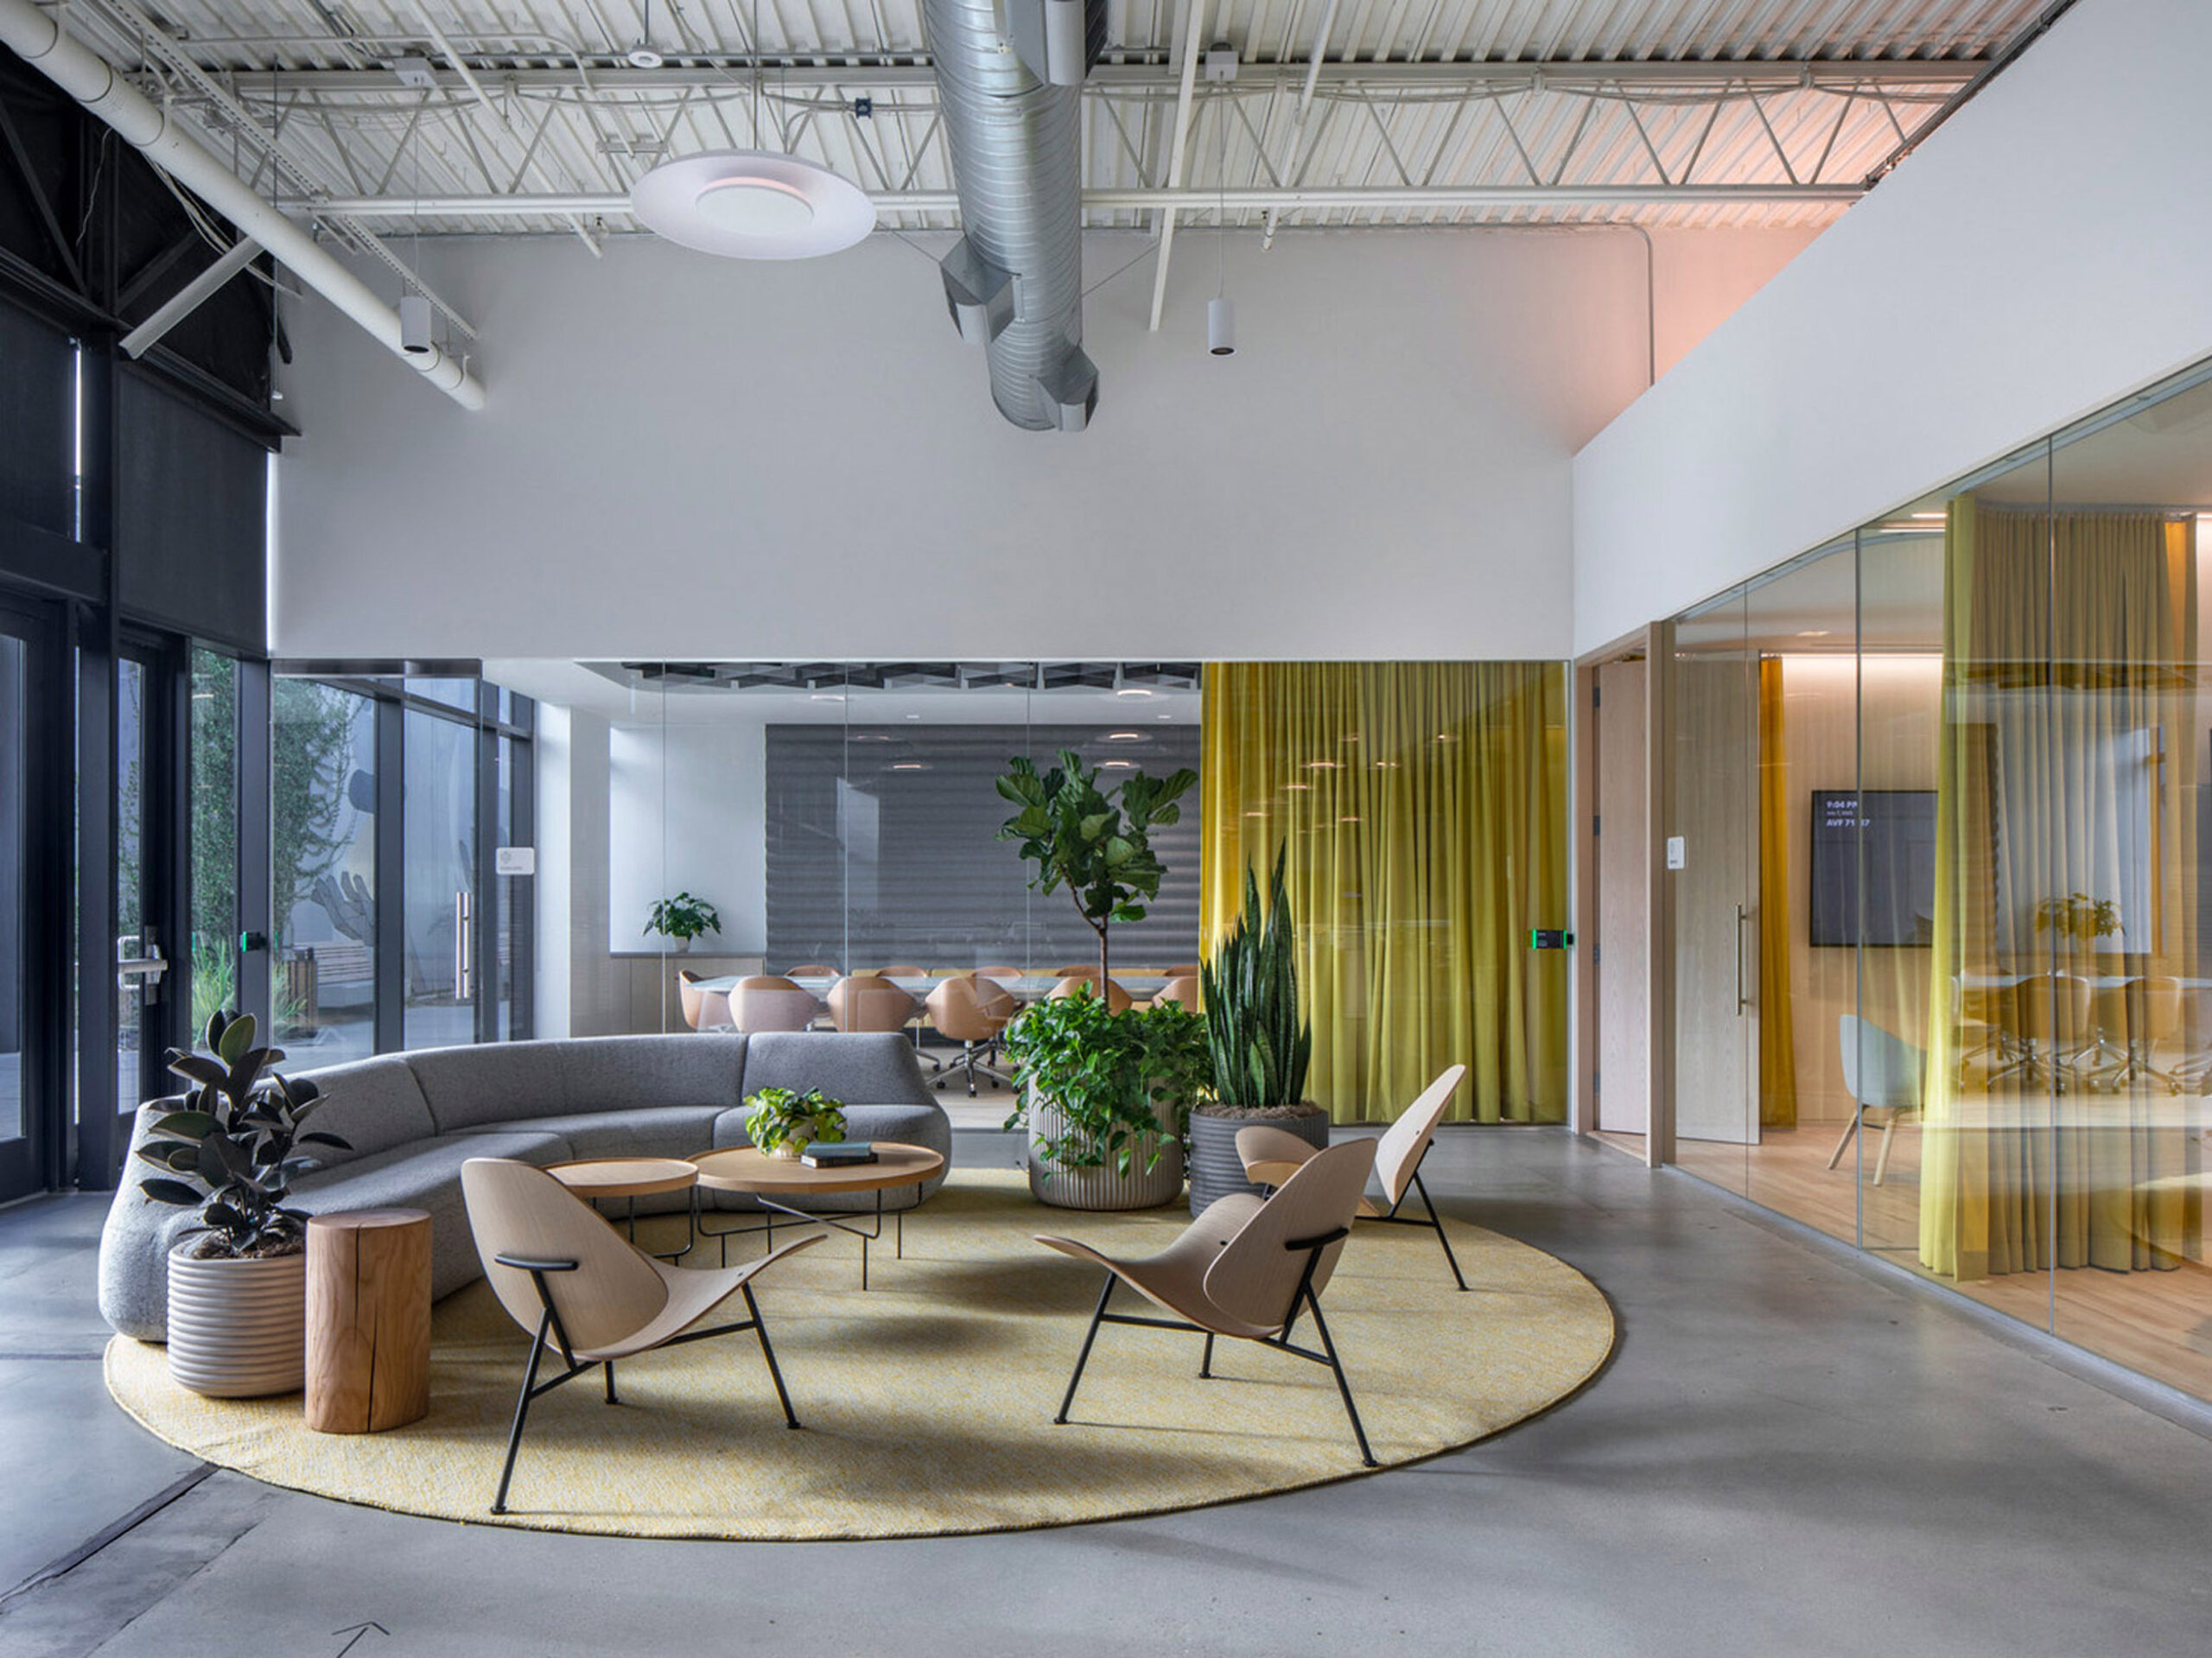 Modern open-plan office lounge with a curved gray sofa and tan armchairs centered around a circular yellow rug. Industrial ceiling, vibrant green office dividers, and potted plants add a touch of nature to the sleek environment.